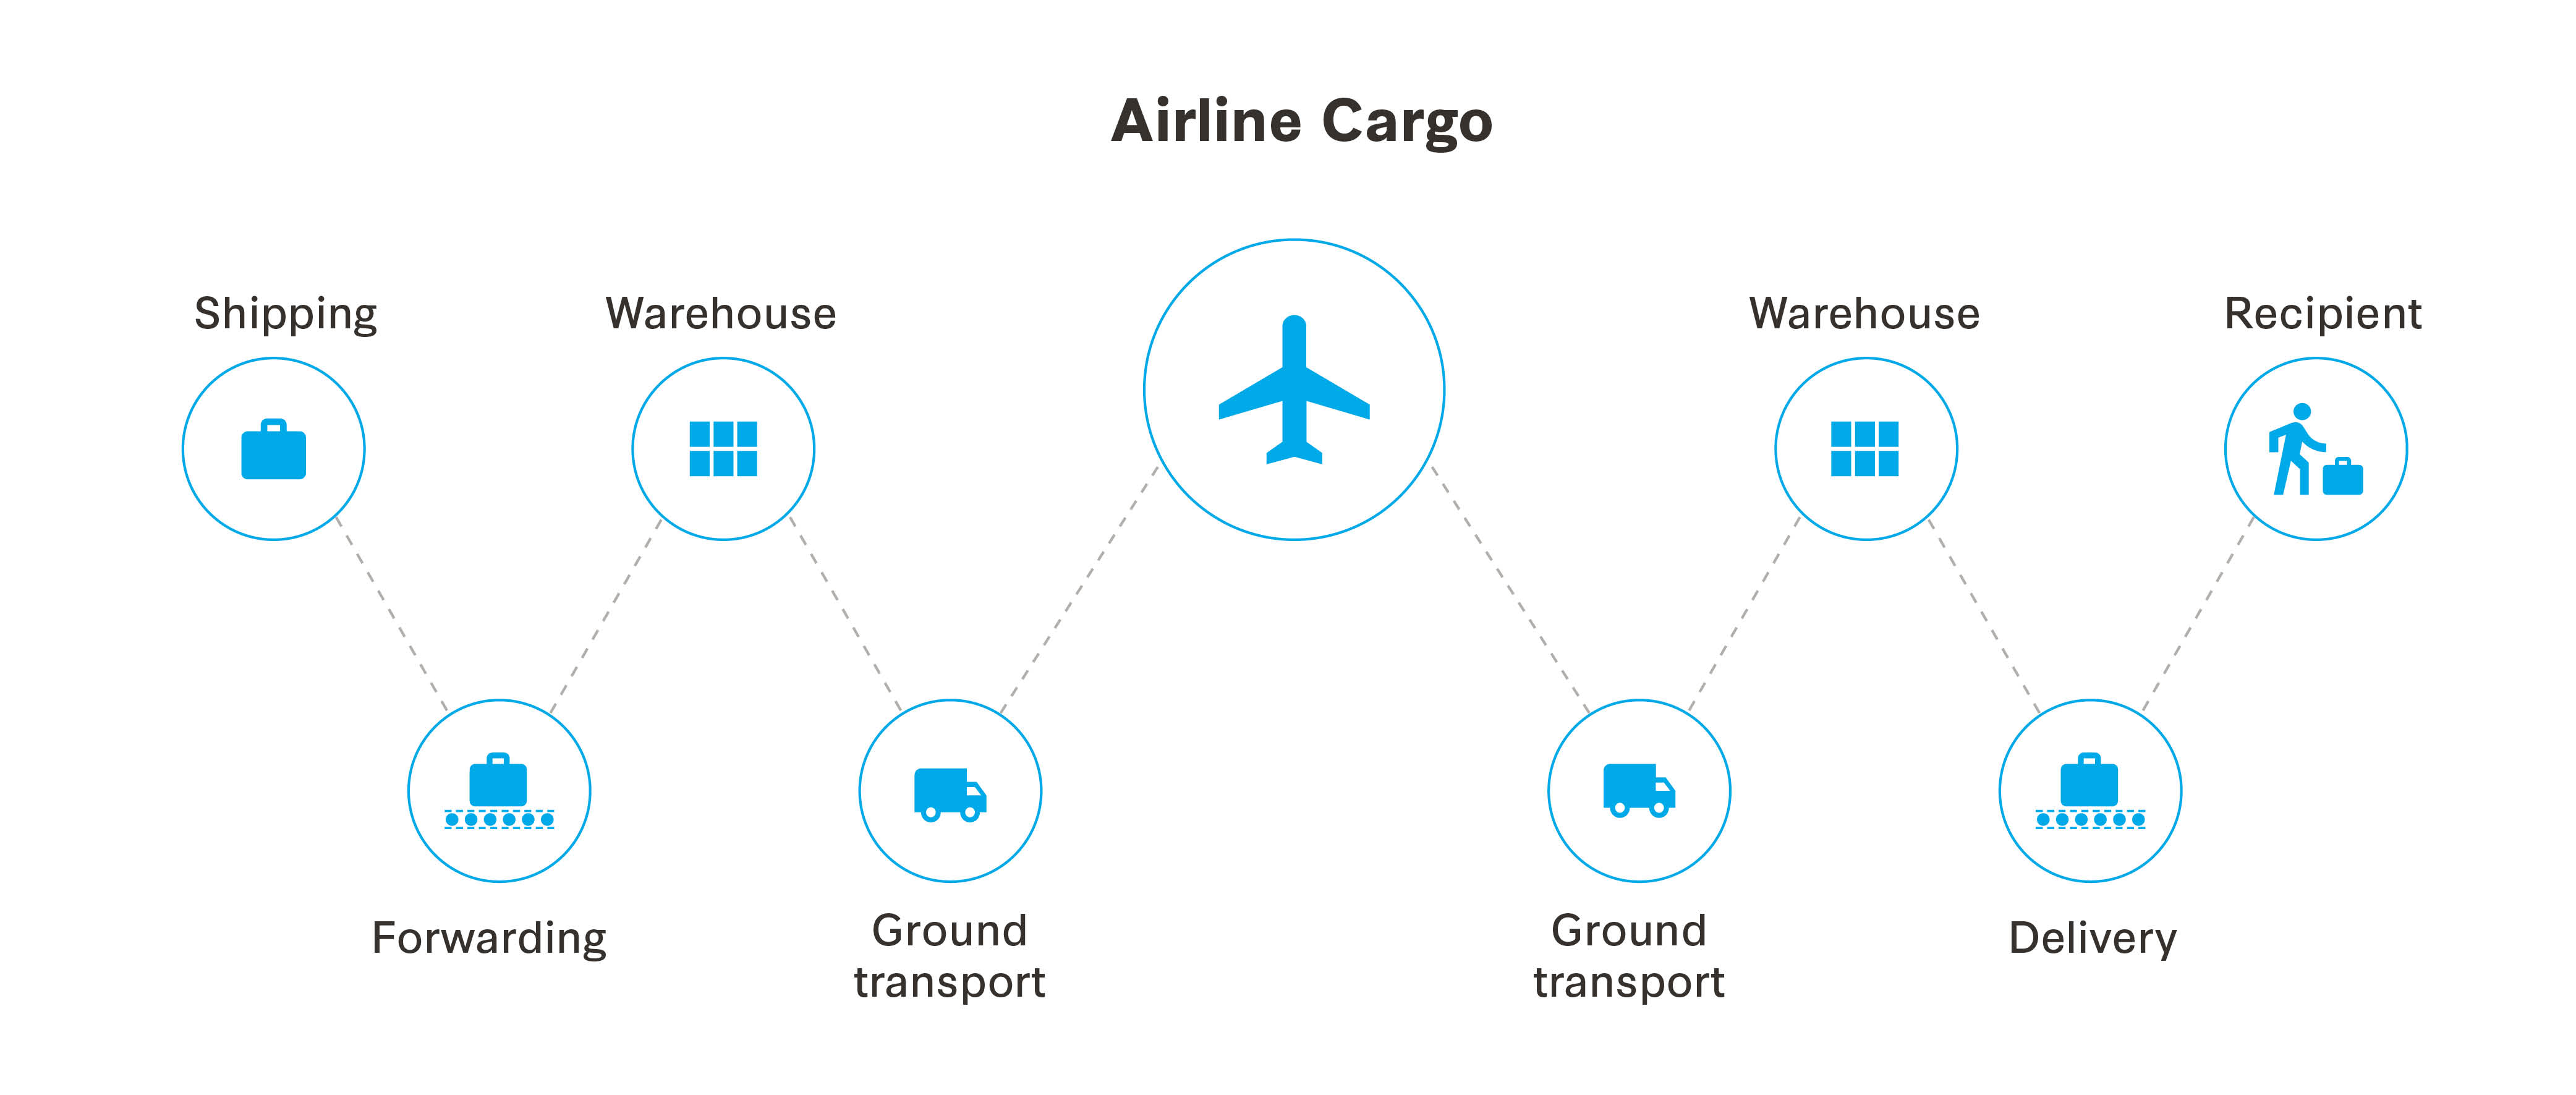 Cargo Services and Baggage Tracking